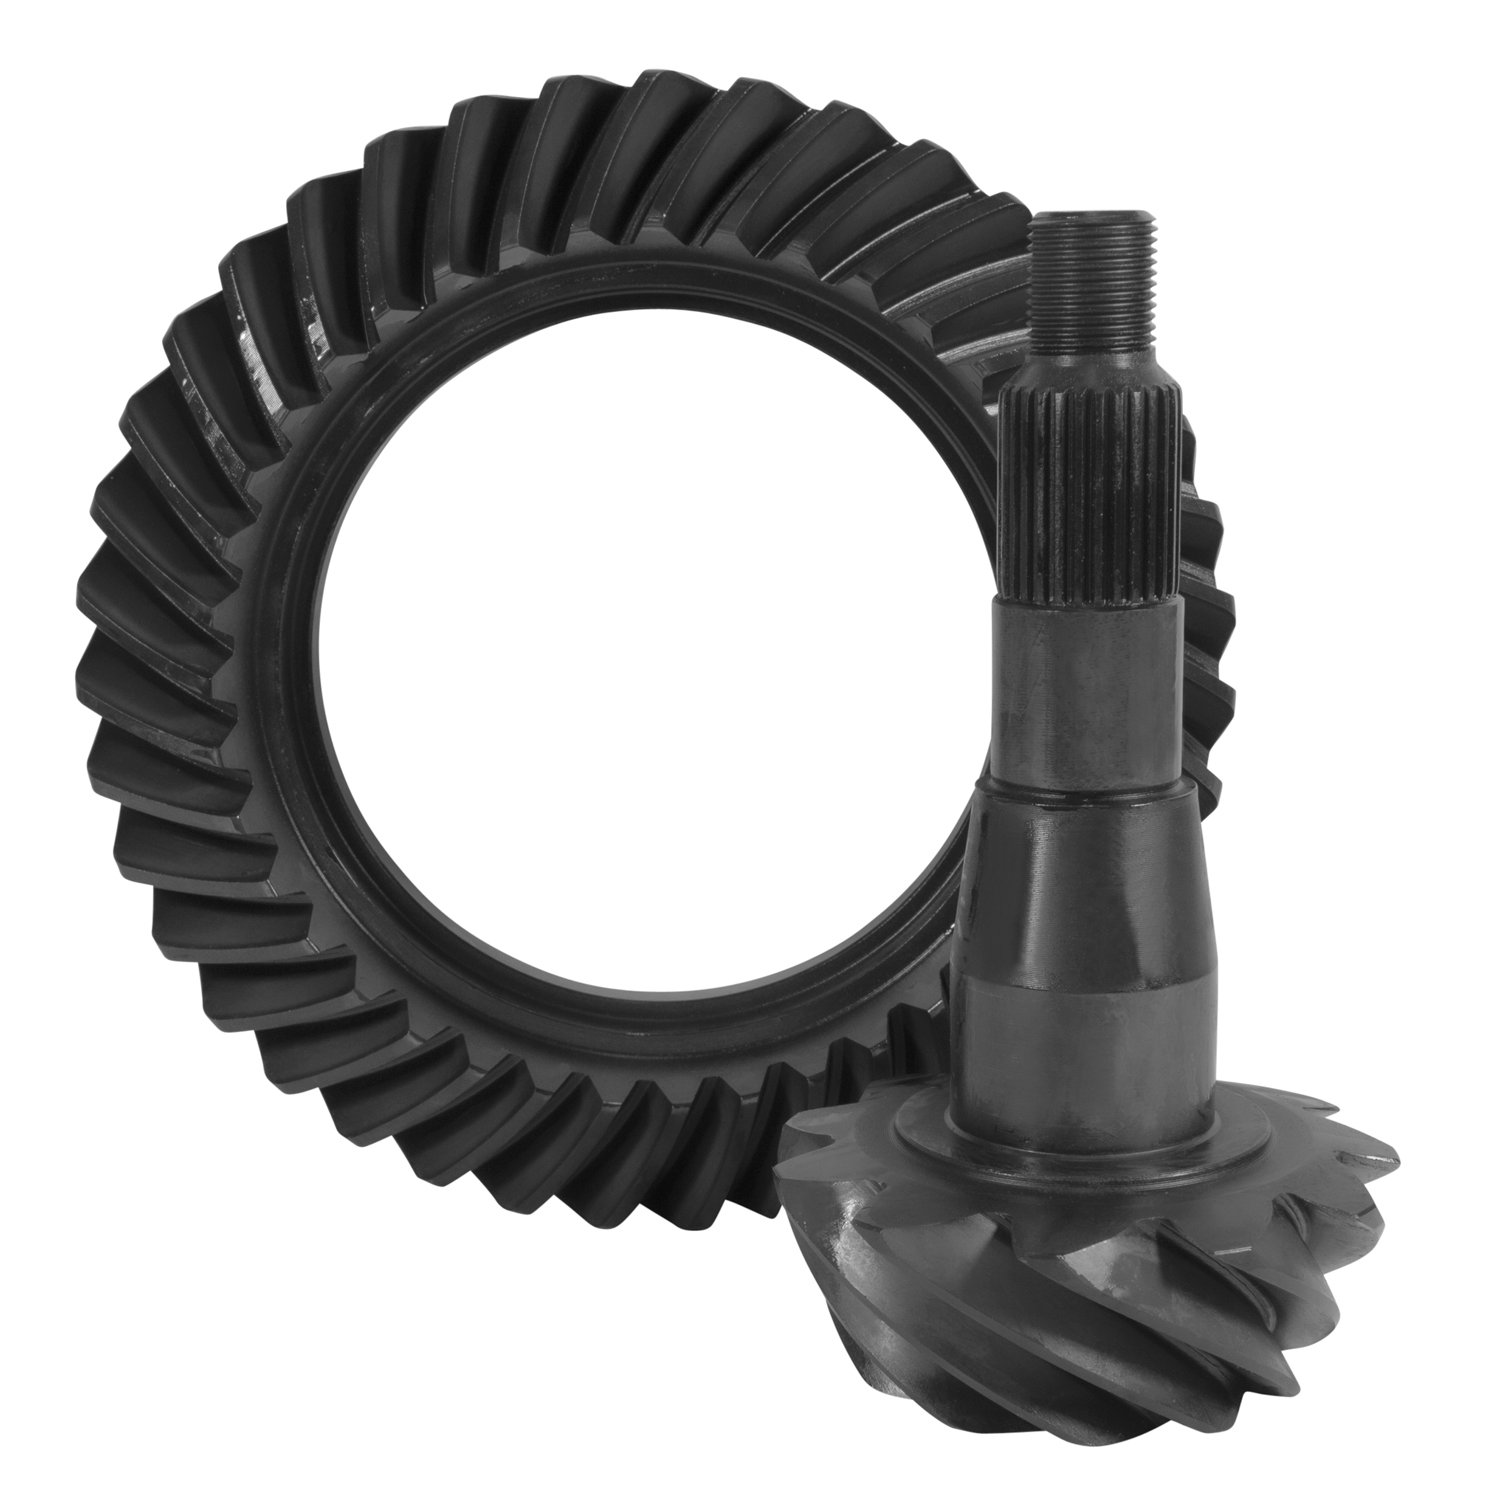 USA Standard ZG C9.25-488 Ring & Pinion Gear Set, For '10 & Down Chrysler 9.25 in., 4.88 Ratio